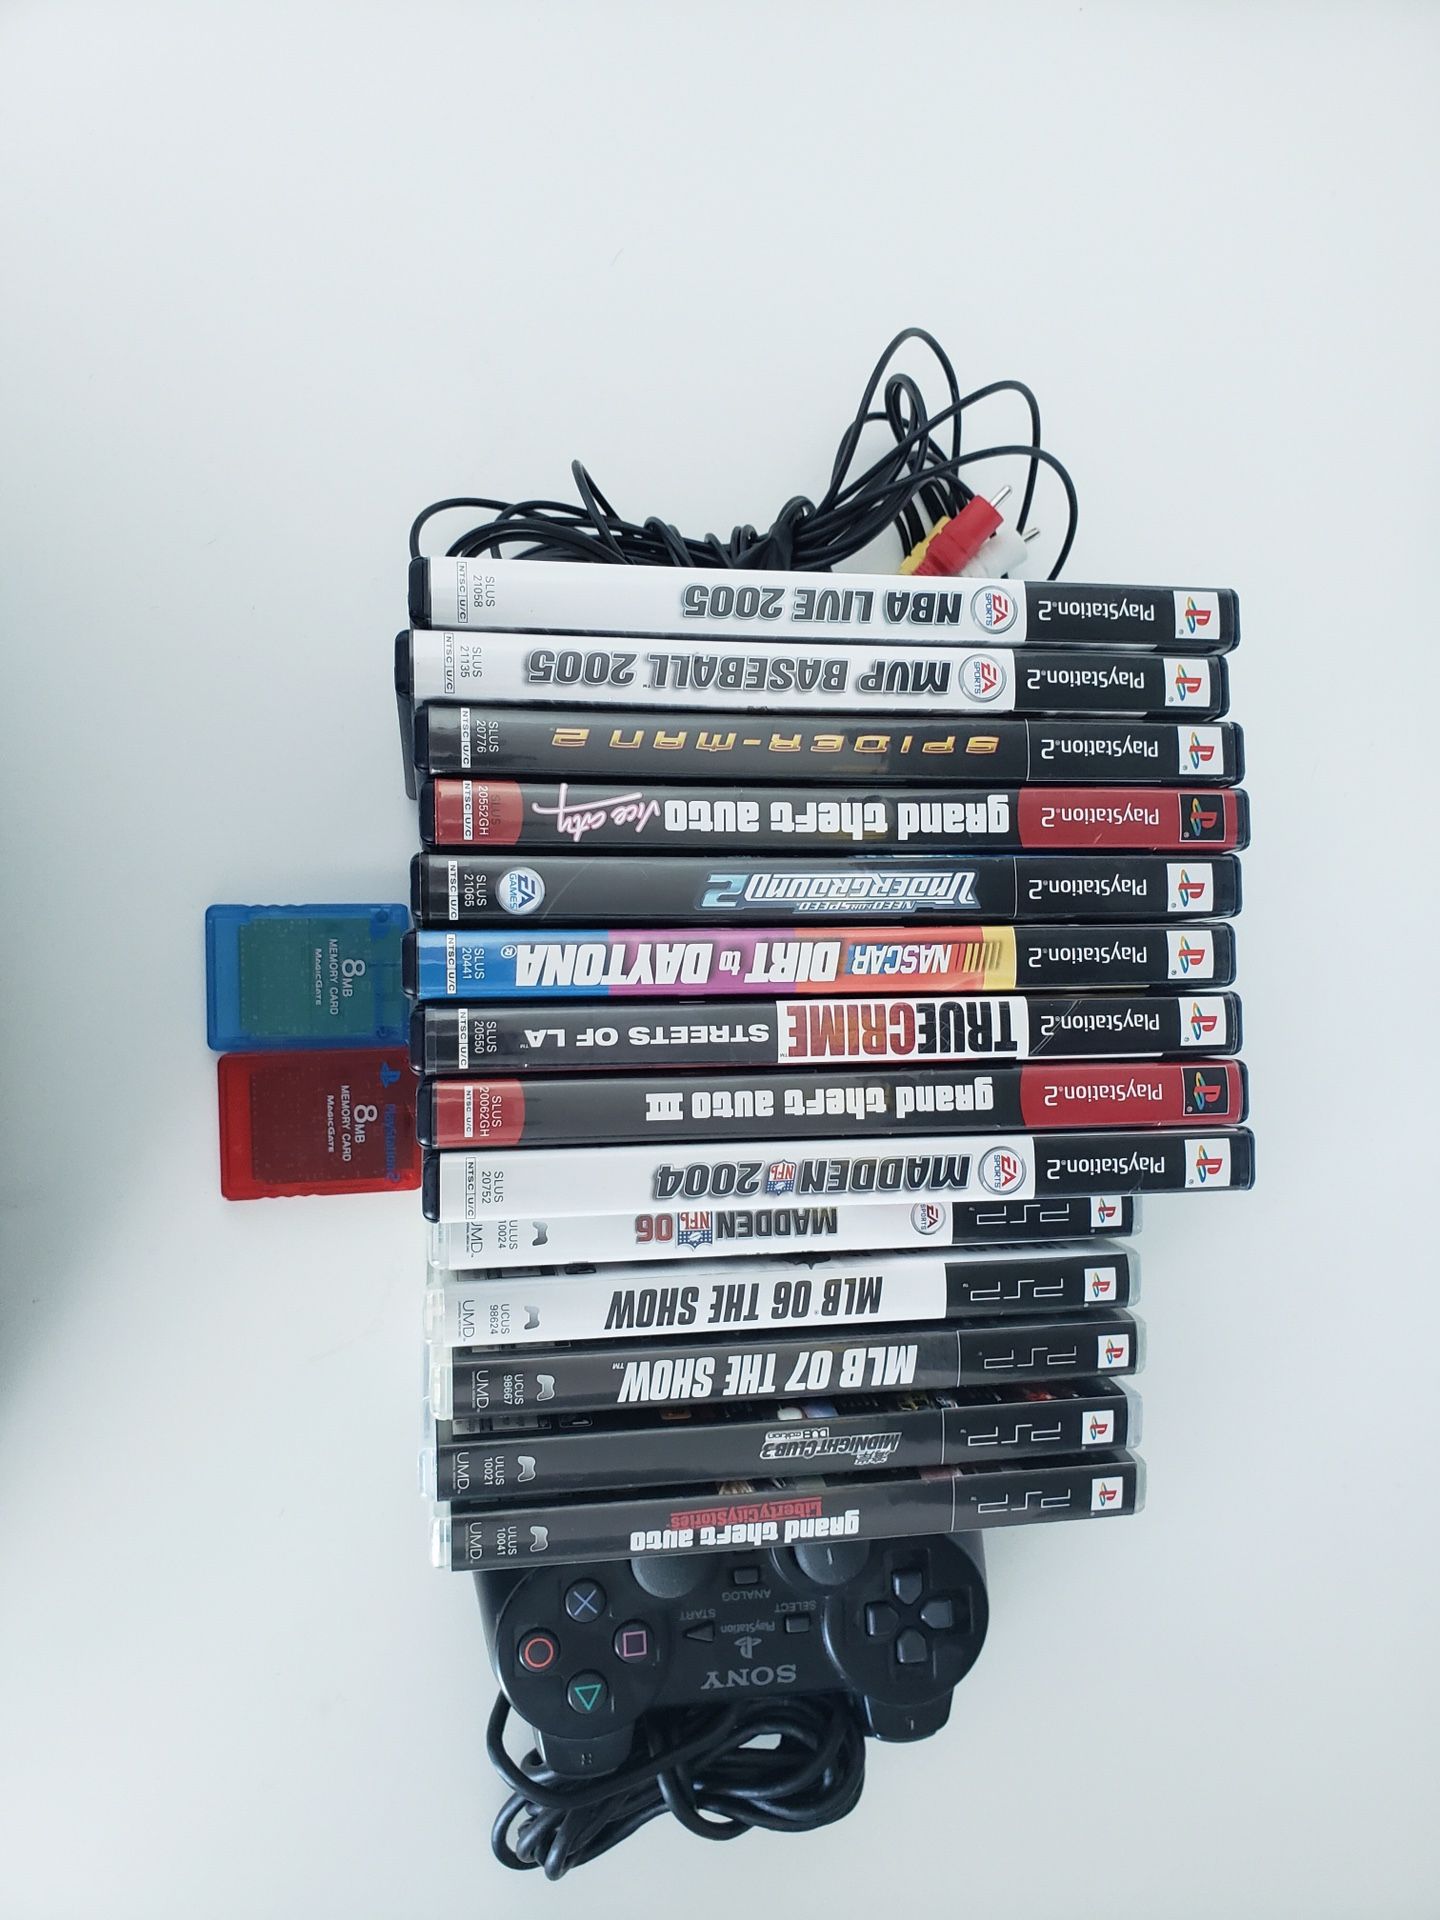 Ps2 and psp game bundle